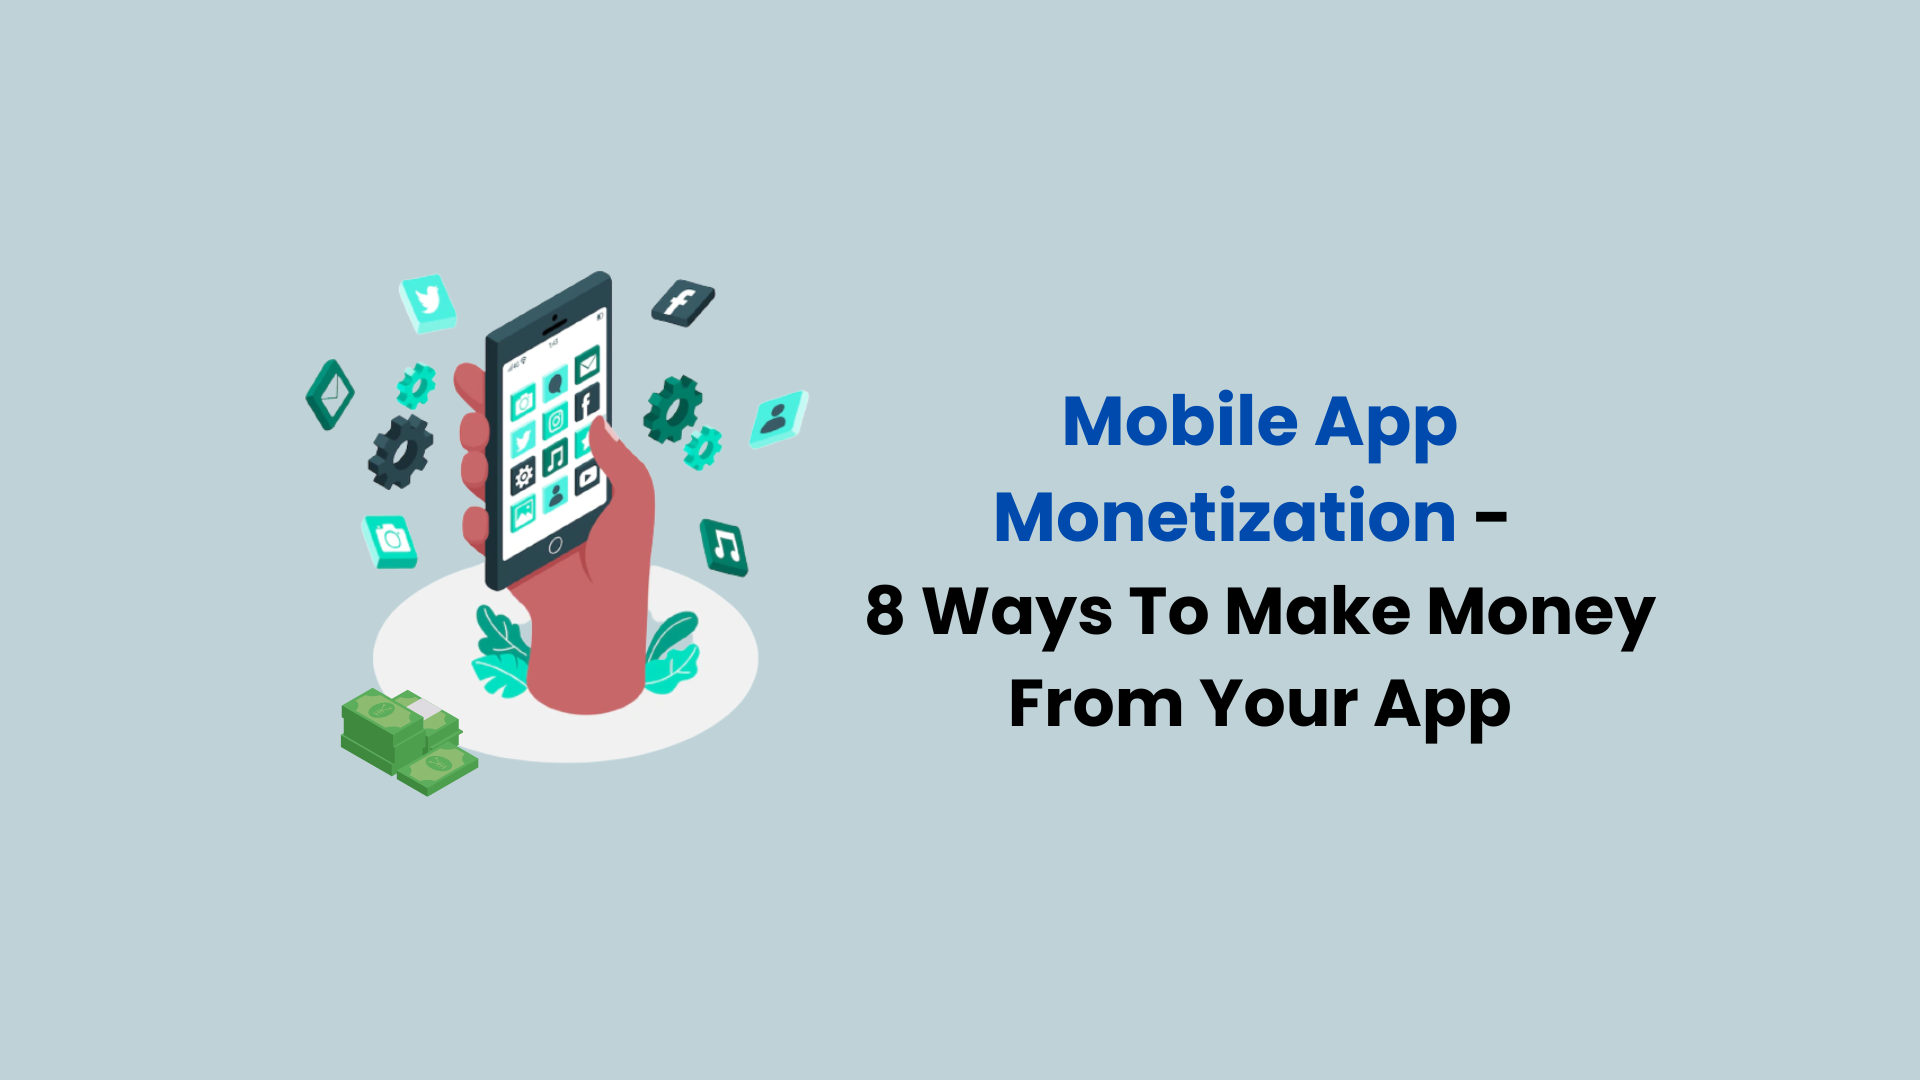 Mobile App Monetization – 8 Ways To Make Money From Your App | SynergyTop